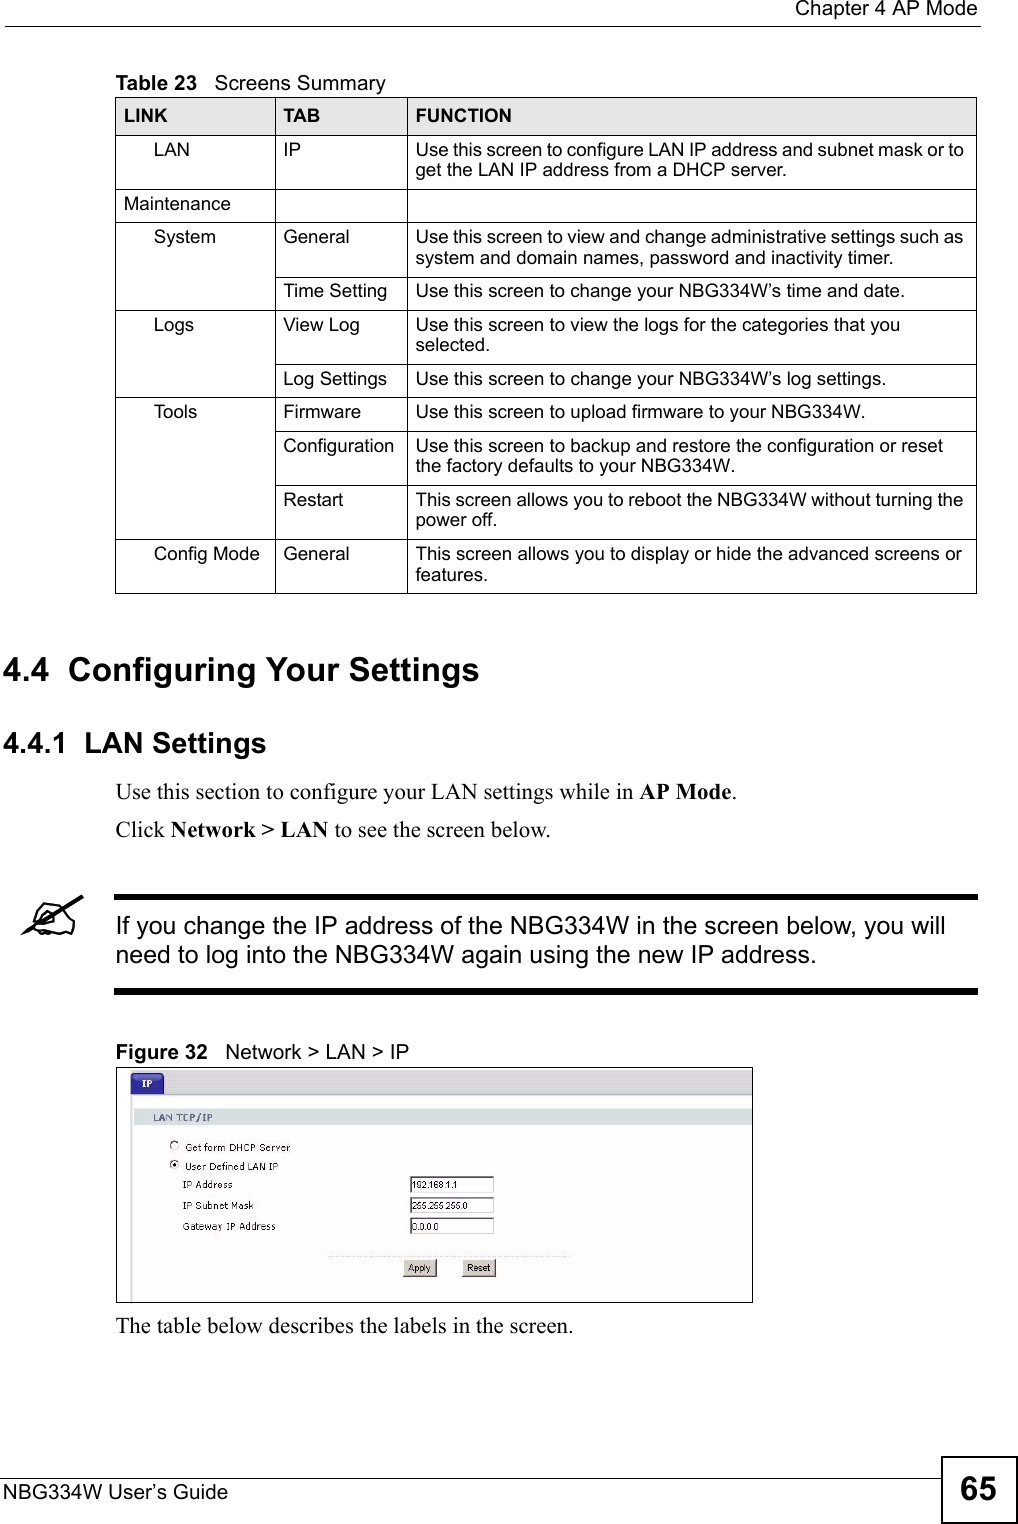  Chapter 4 AP ModeNBG334W User’s Guide 654.4  Configuring Your Settings4.4.1  LAN SettingsUse this section to configure your LAN settings while in AP Mode. Click Network &gt; LAN to see the screen below.&quot;If you change the IP address of the NBG334W in the screen below, you will need to log into the NBG334W again using the new IP address.Figure 32   Network &gt; LAN &gt; IP   The table below describes the labels in the screen.LAN IP Use this screen to configure LAN IP address and subnet mask or to get the LAN IP address from a DHCP server.MaintenanceSystem General Use this screen to view and change administrative settings such as system and domain names, password and inactivity timer.Time Setting Use this screen to change your NBG334W’s time and date.Logs View Log Use this screen to view the logs for the categories that you selected.Log Settings Use this screen to change your NBG334W’s log settings.To o l s Firmware Use this screen to upload firmware to your NBG334W.Configuration Use this screen to backup and restore the configuration or reset the factory defaults to your NBG334W. Restart This screen allows you to reboot the NBG334W without turning the power off.Config Mode General This screen allows you to display or hide the advanced screens or features.Table 23   Screens SummaryLINK TAB FUNCTION